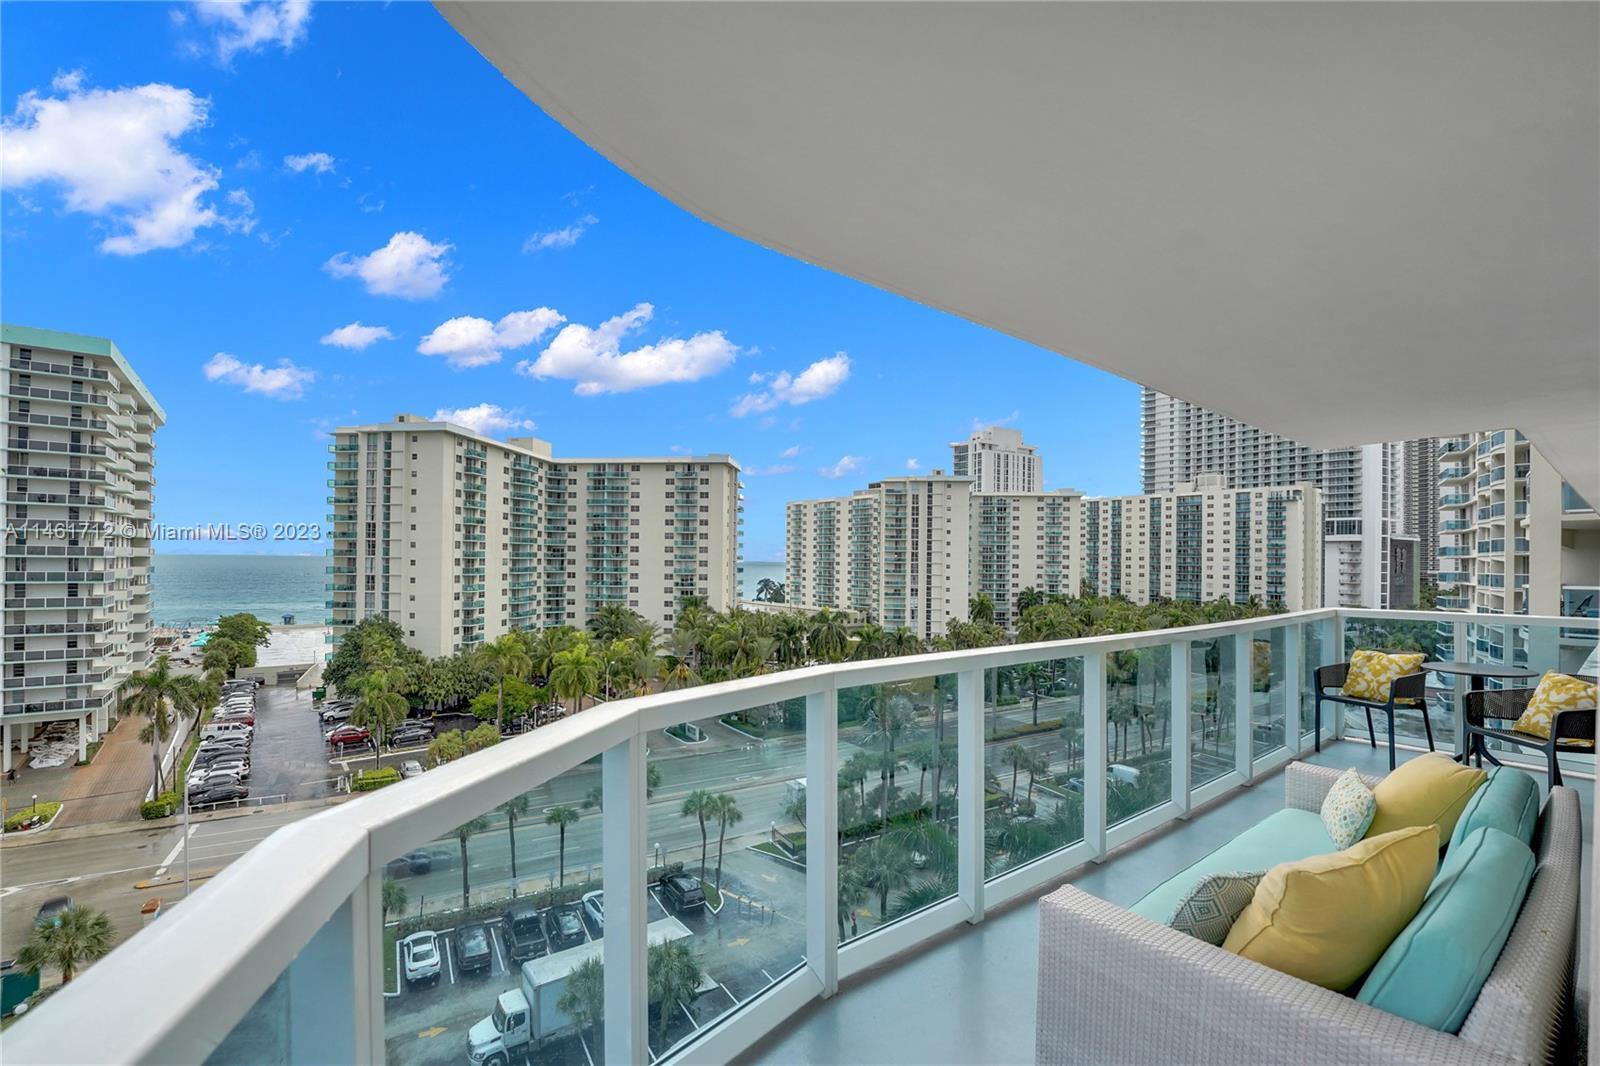 Photo of 3800 S Ocean Dr #820 in Hollywood, FL